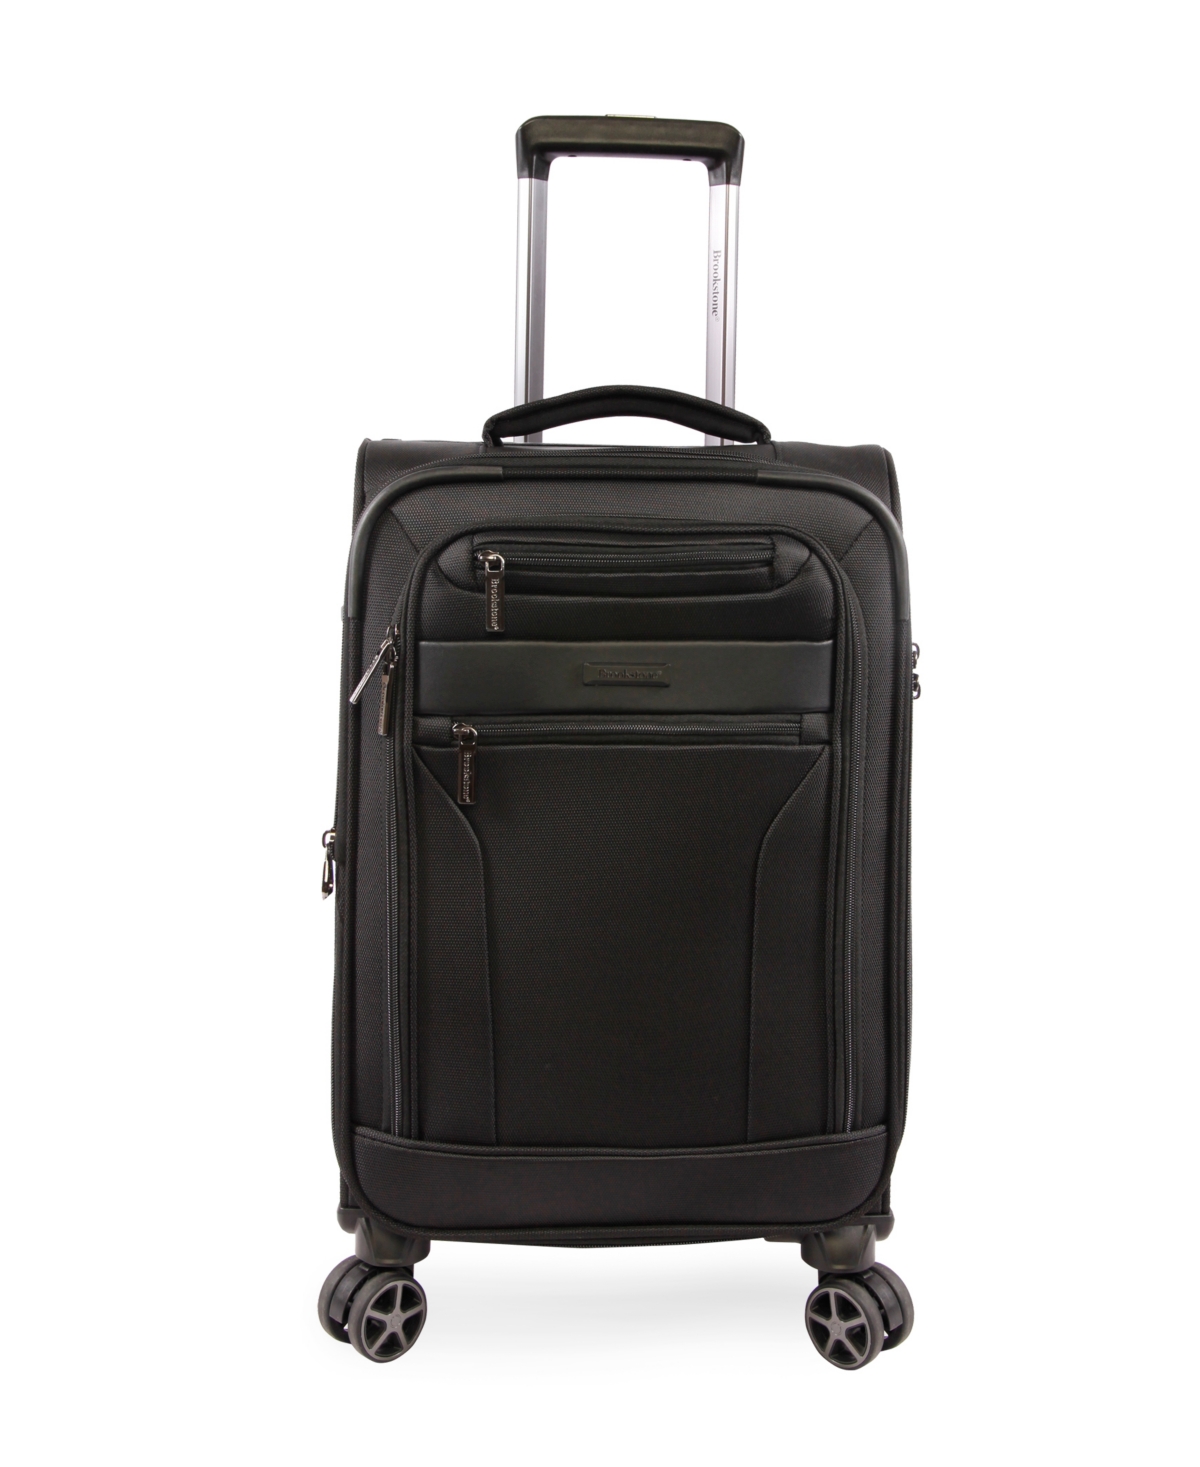 Harbor 21" Softside Carry-On Luggage with Charging Port - Navy